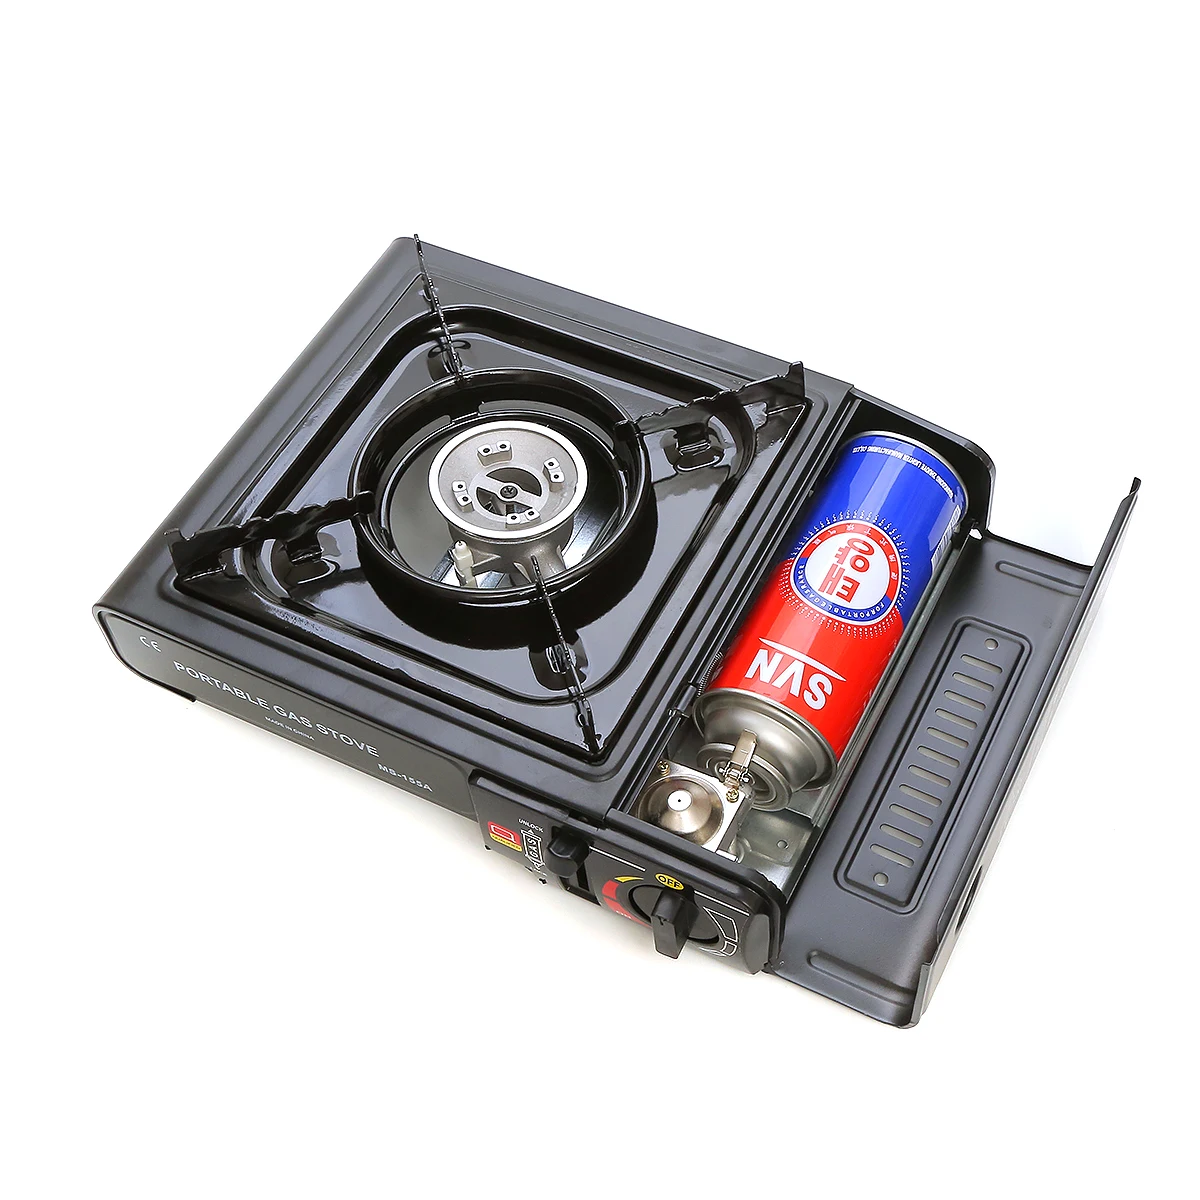 Portable Single Stove Gas Butane Stove Burner Electric Ignition With  Plastic Case - Buy Portable Single Stove Gas Butane Stove Burner Electric  Ignition With Plastic Case Product on